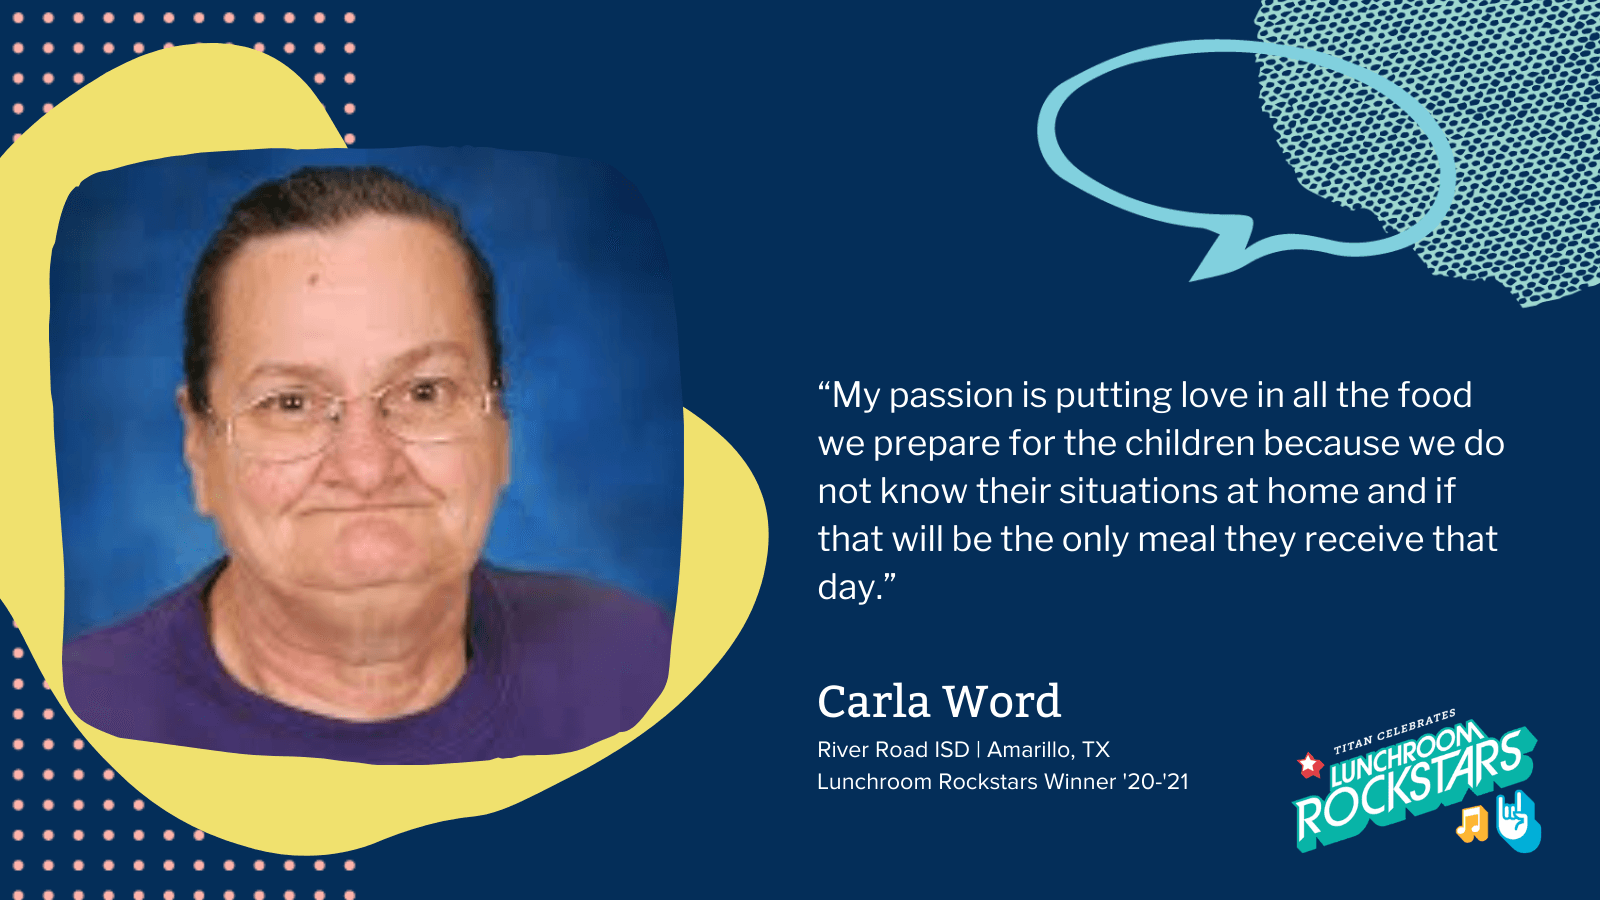 My passion is putting love in all the food we prepare for the children because we do not know their situations at home and if that will be the only meal they receive that day. Carla Word River Road ISD Amarillo TX Lunchroom Rockstars Winner '20-'21